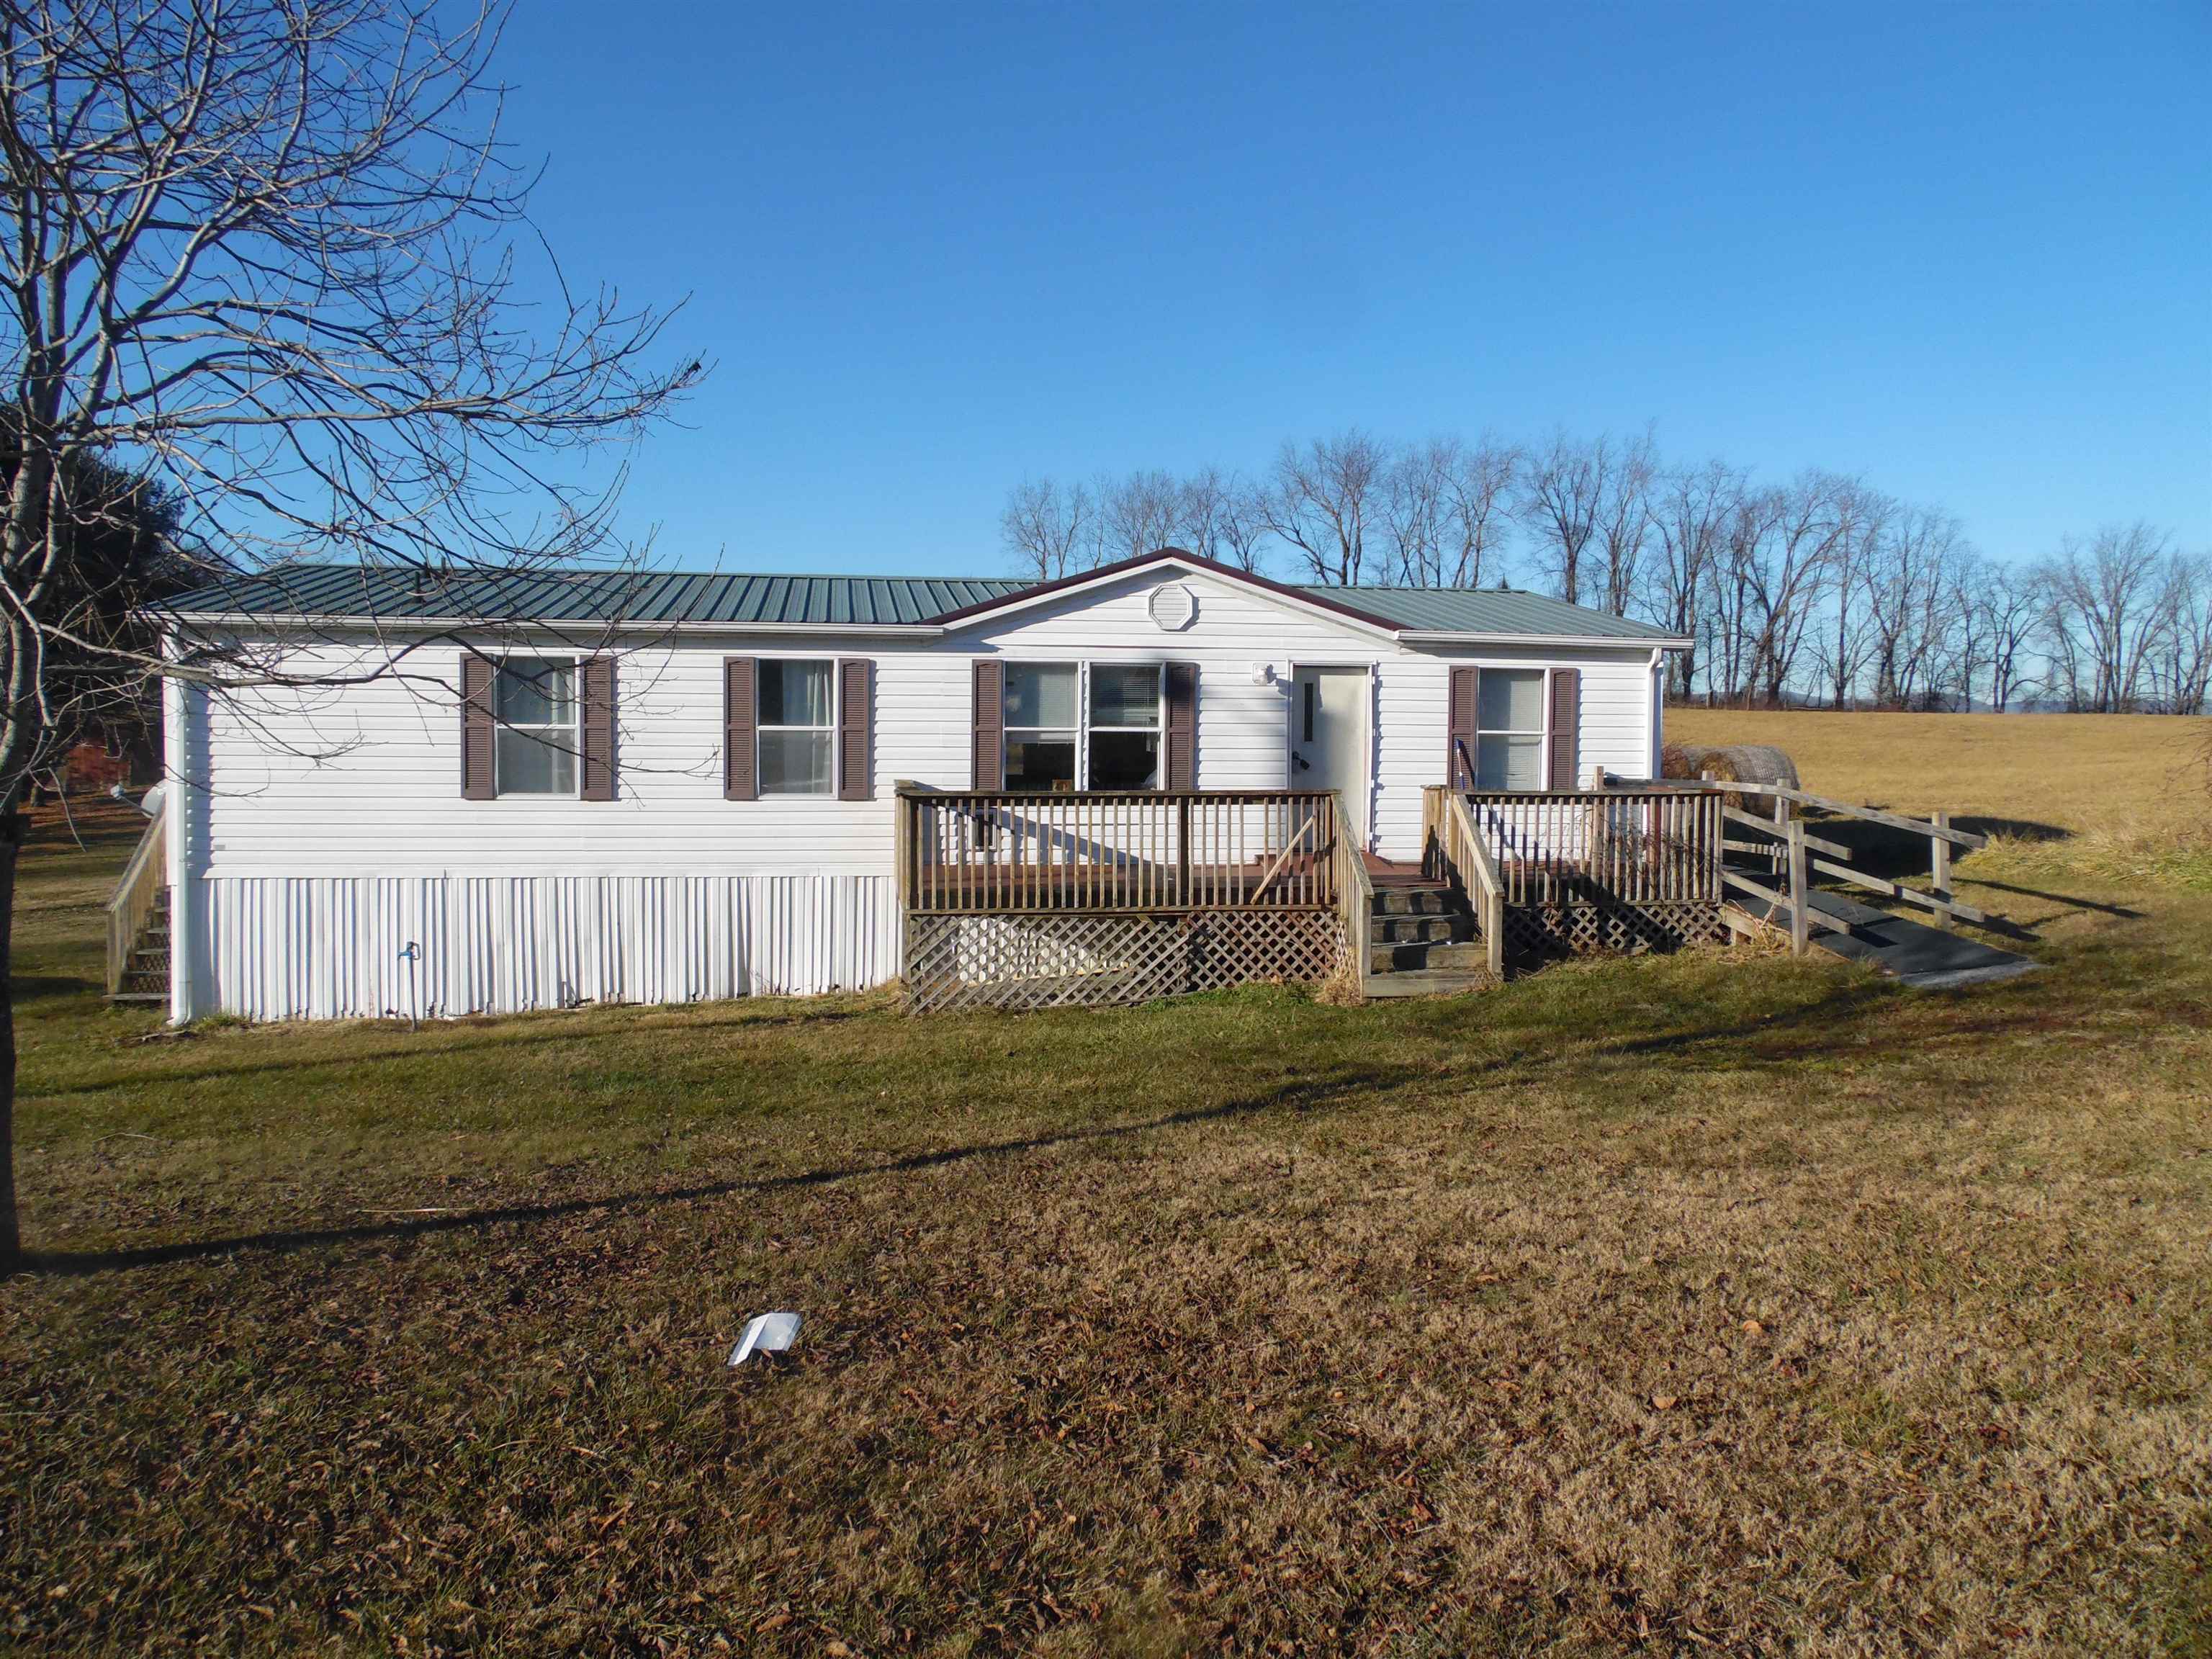 This three bedroom two bath home has an open floor plan with a living room dinning room and kitchen. If you want a great country location this is it. There are two storage plus single wide trailer that convey with the property. The home is ADA accessible.